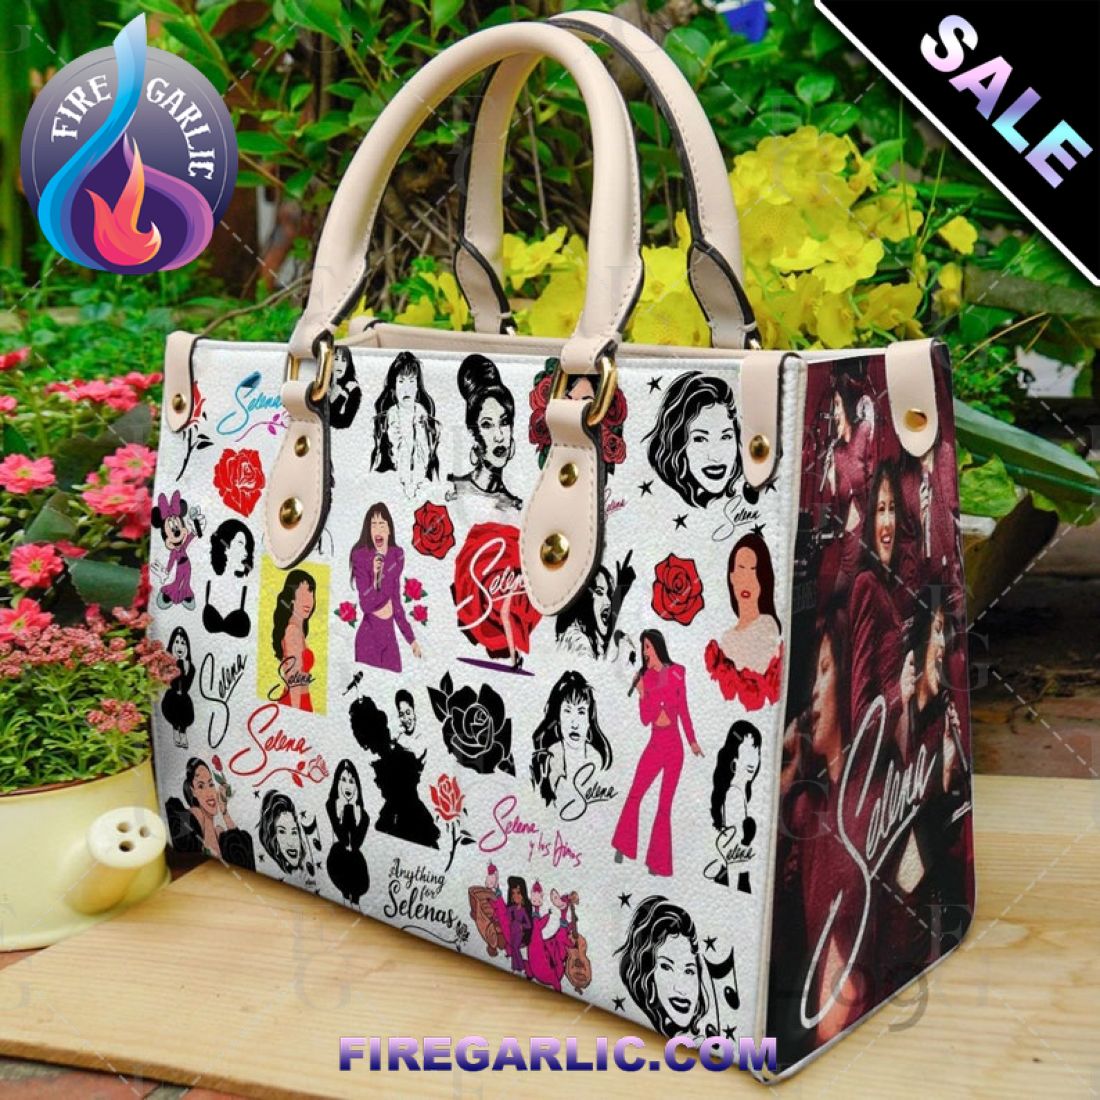 Selena Quintanilla Sticker Leather Handbag
Price from: 67.99
Buy it now at: https://t.co/16RPGA5ZtH
 [page_title]
Attention all Selena Quintanilla fans and fashionistas! Get ready to elevate your style with the ultimate tribute to the Queen of Tejano mus... https://t.co/zWFE8UT0uU